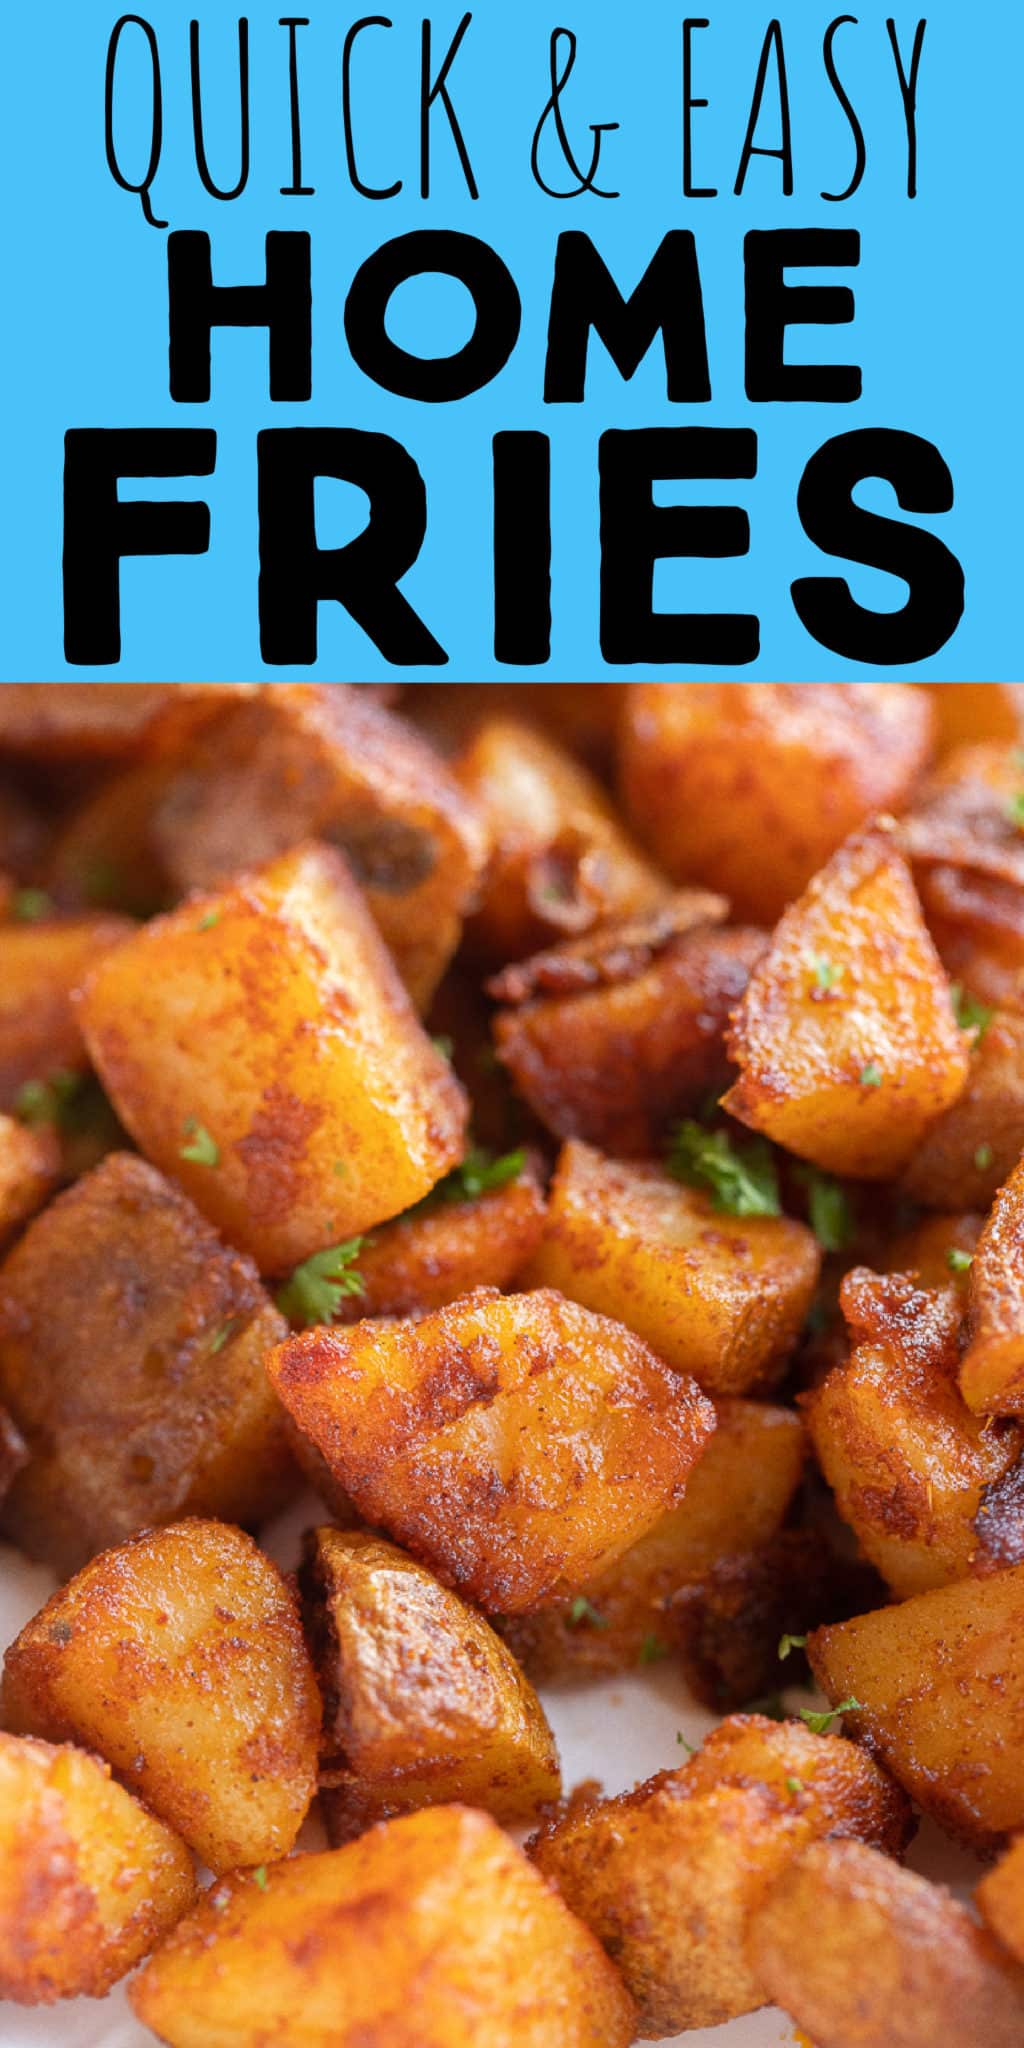 Quick and Easy Home Fries Recipe - She Likes Food